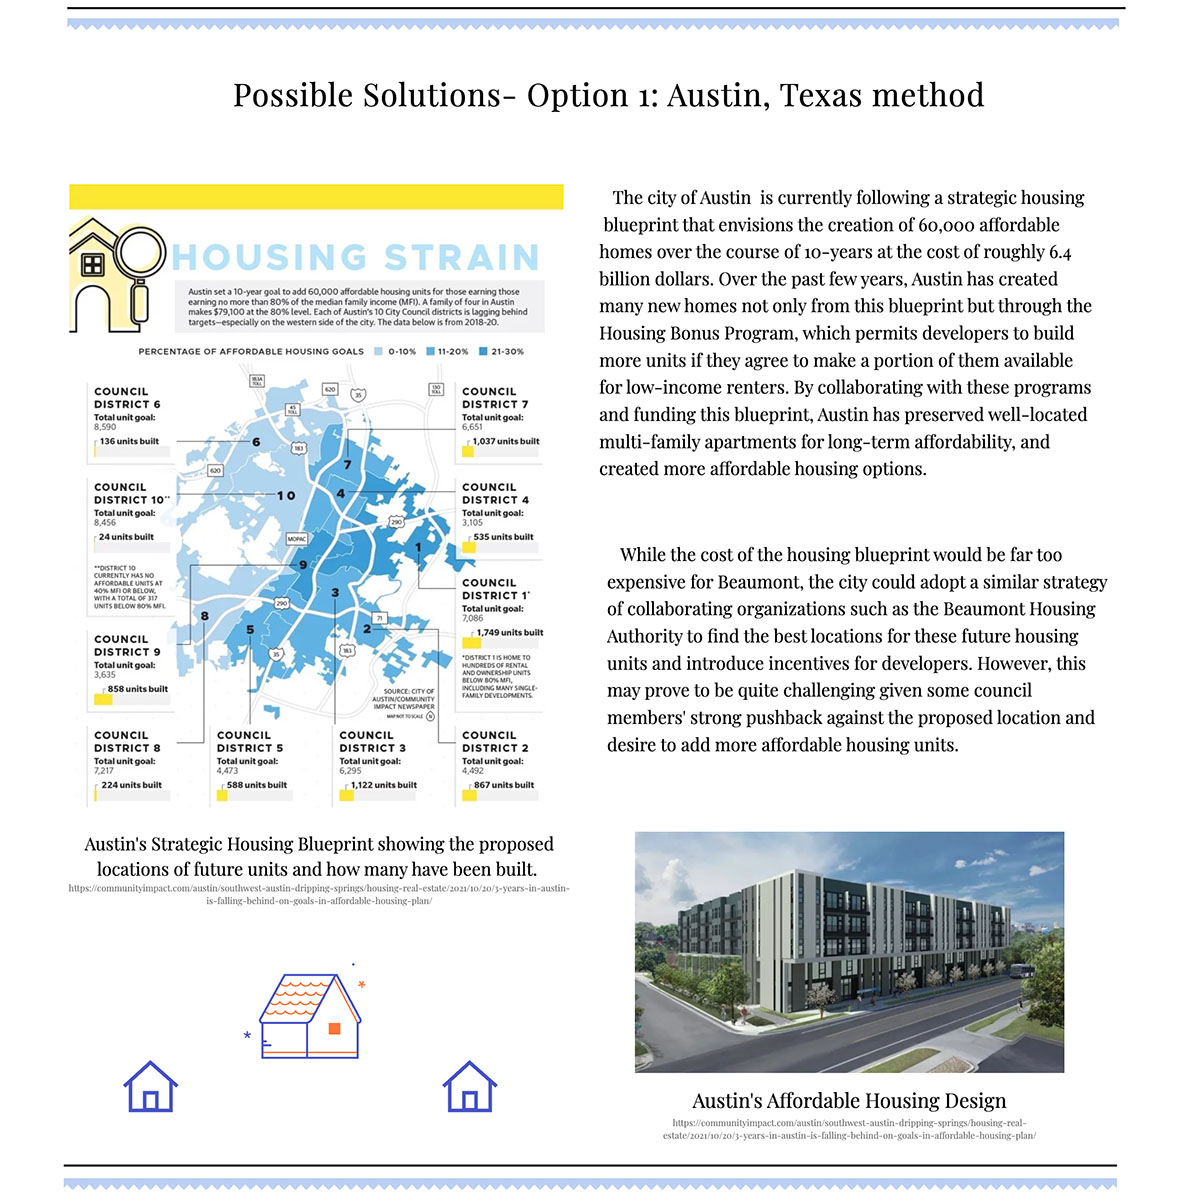 Visual example of how Diana White presented this coursework in ePortfolio: Shows a graphic of a strategic housing blueprint from Austin, Texas, along with a description connecting the example to the project. 